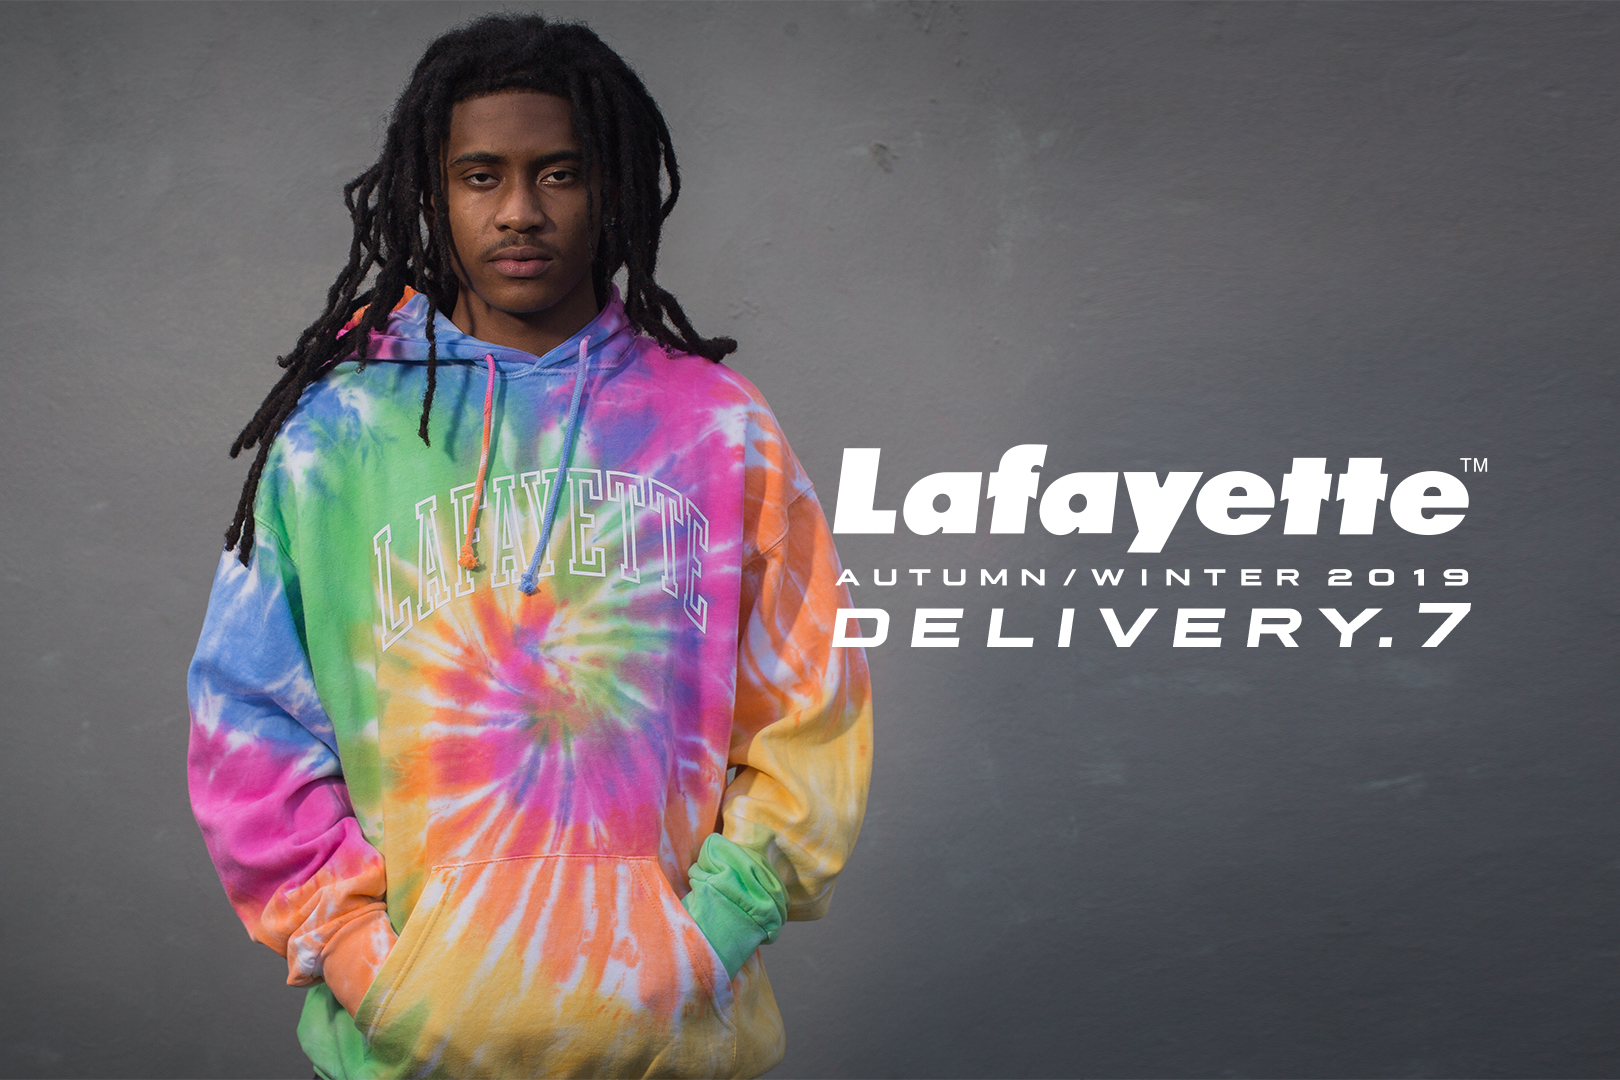 Lafayette 2019 Autumn/Winter Collection Delivery.7